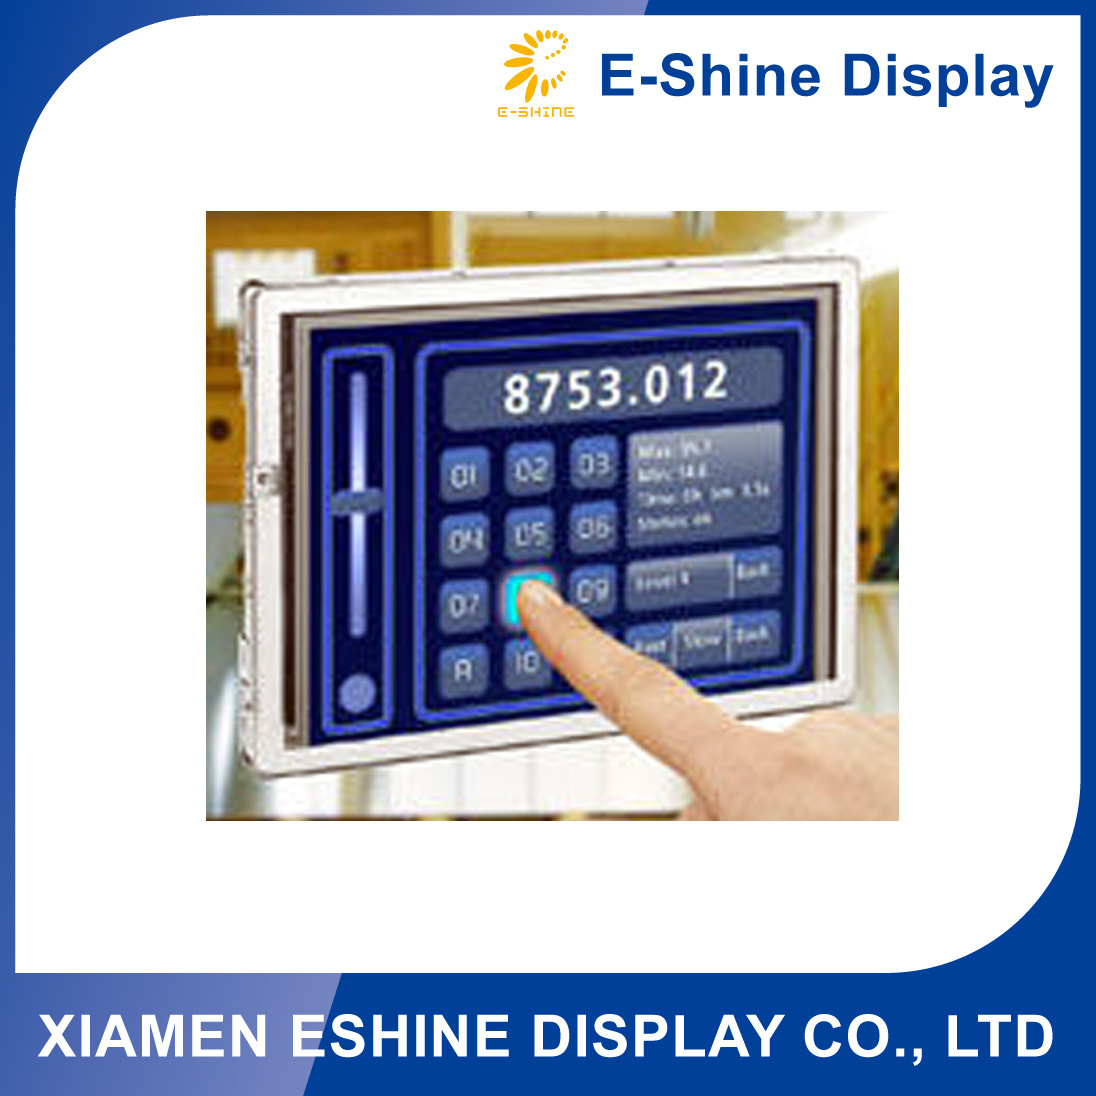 7.2 Inch TFT LCD Display for Industrial Application